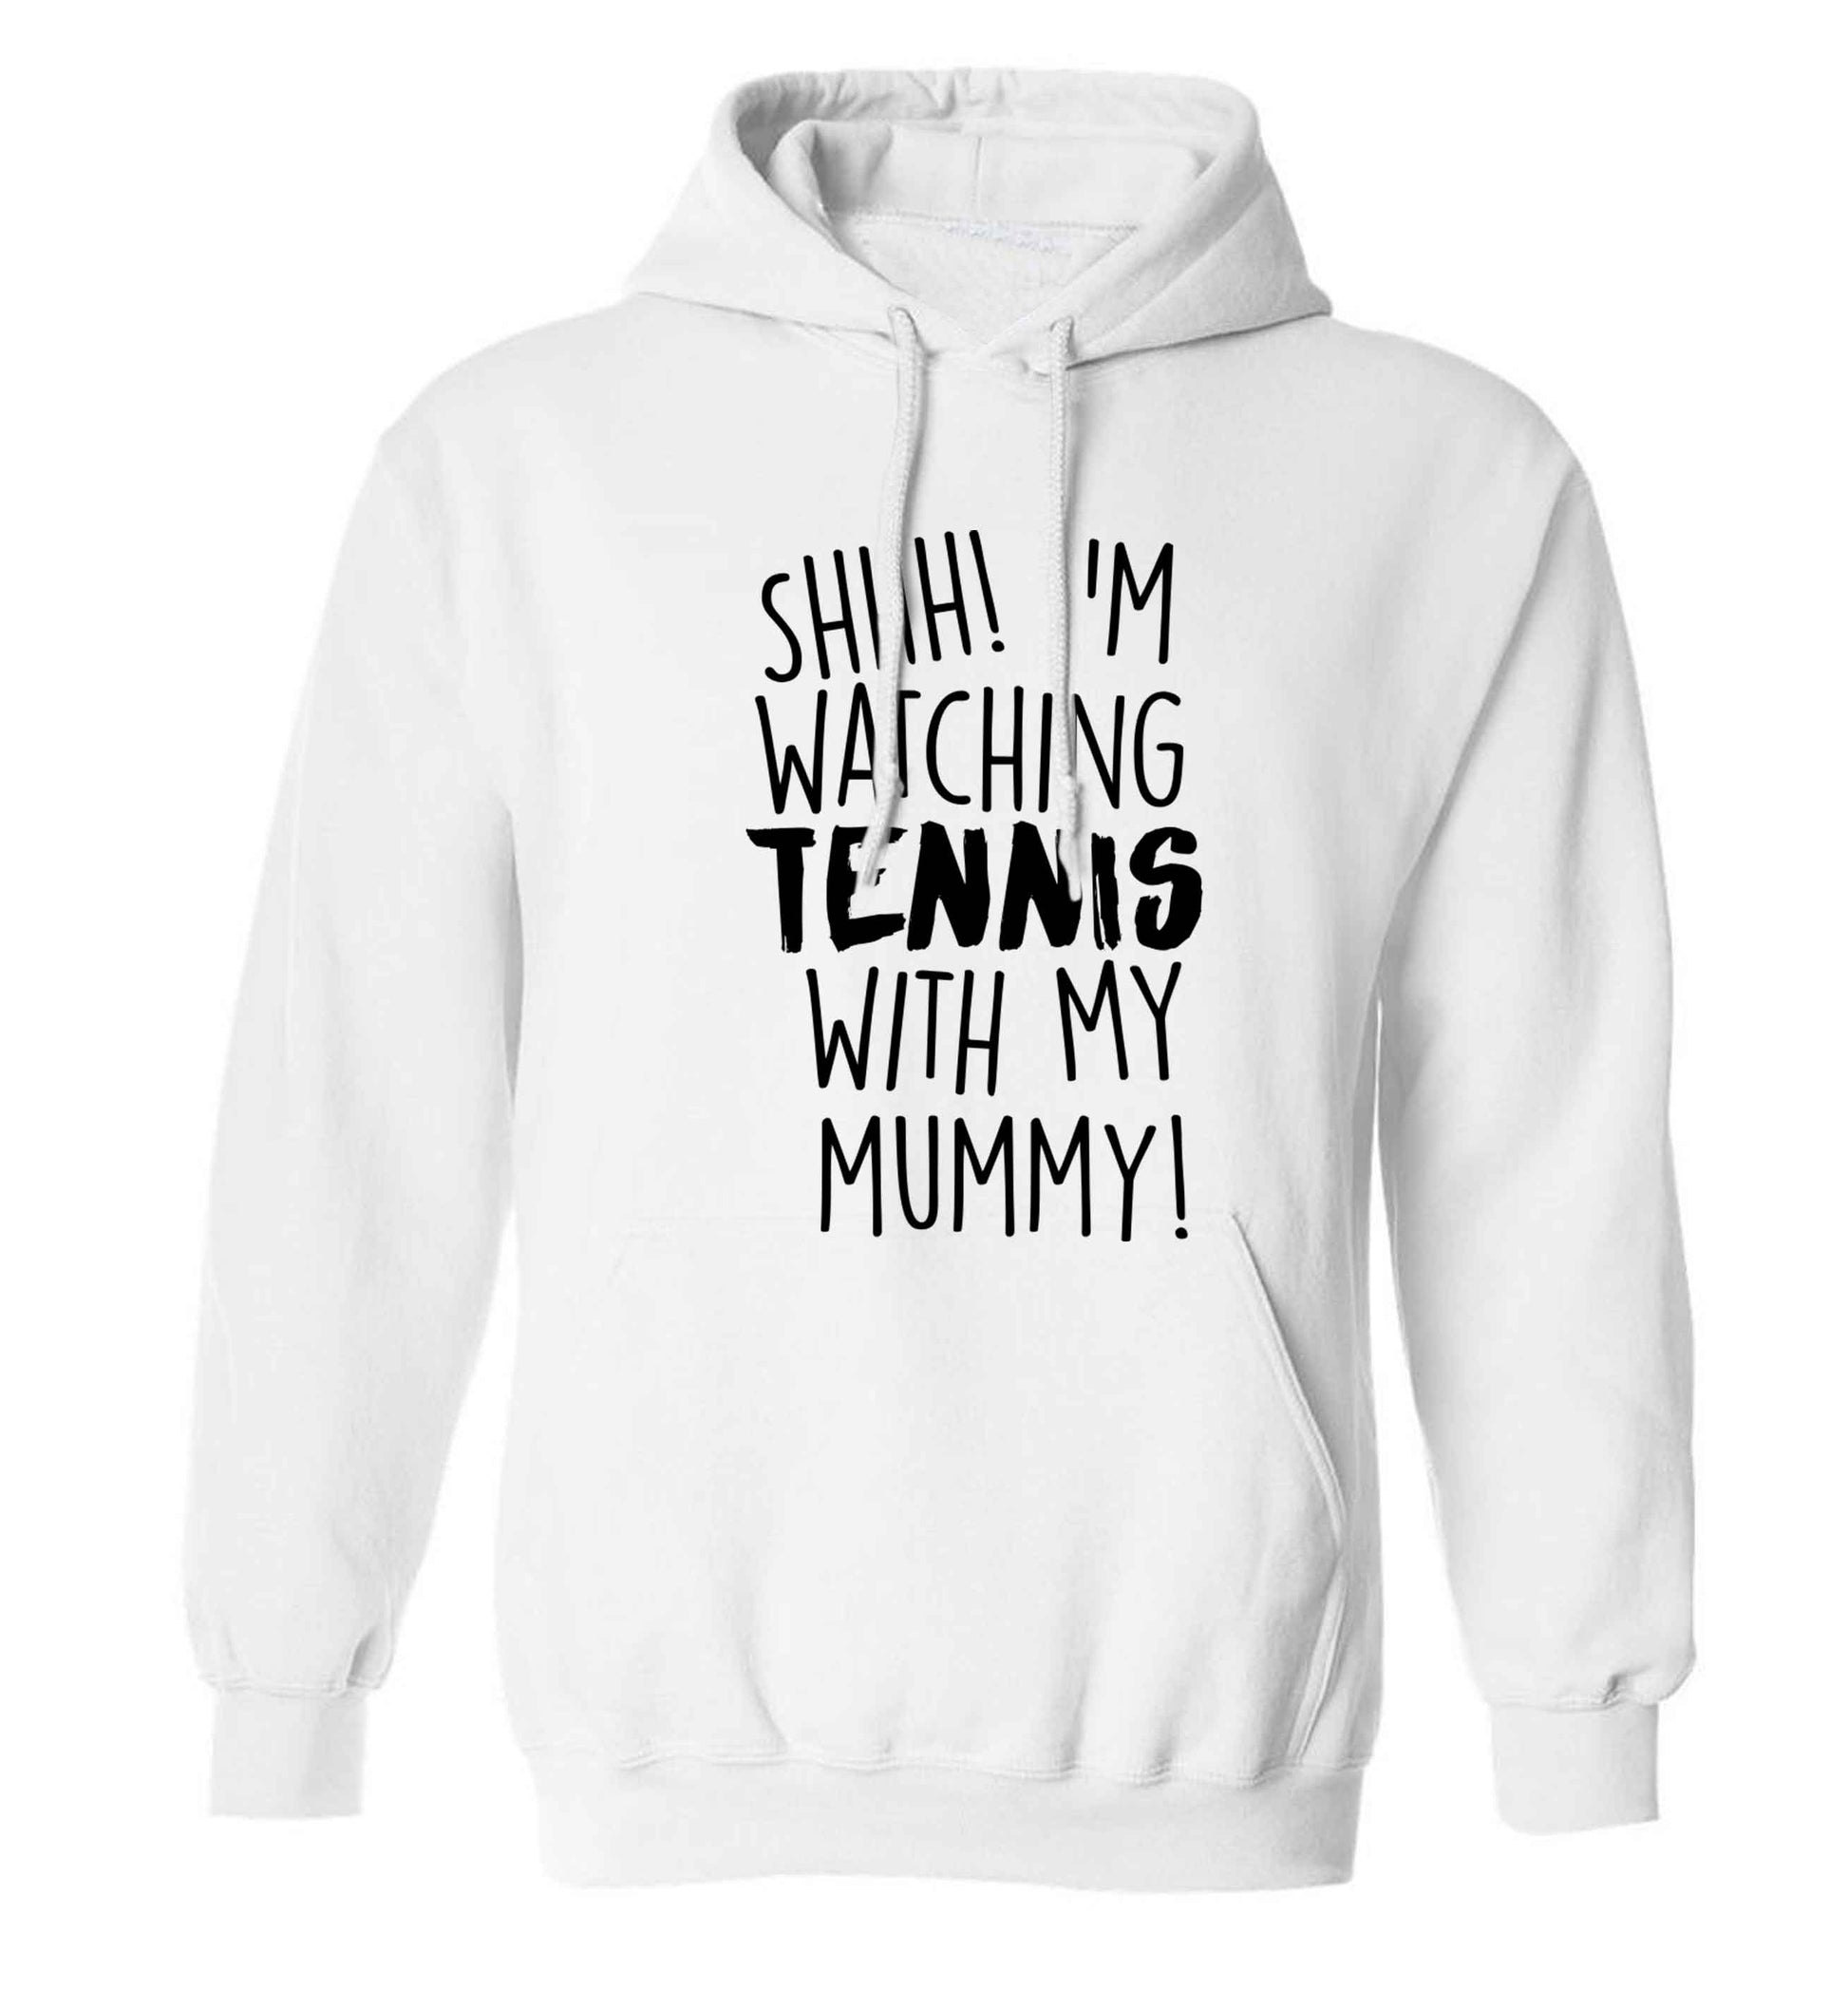 Shh! I'm watching tennis with my mummy! adults unisex white hoodie 2XL